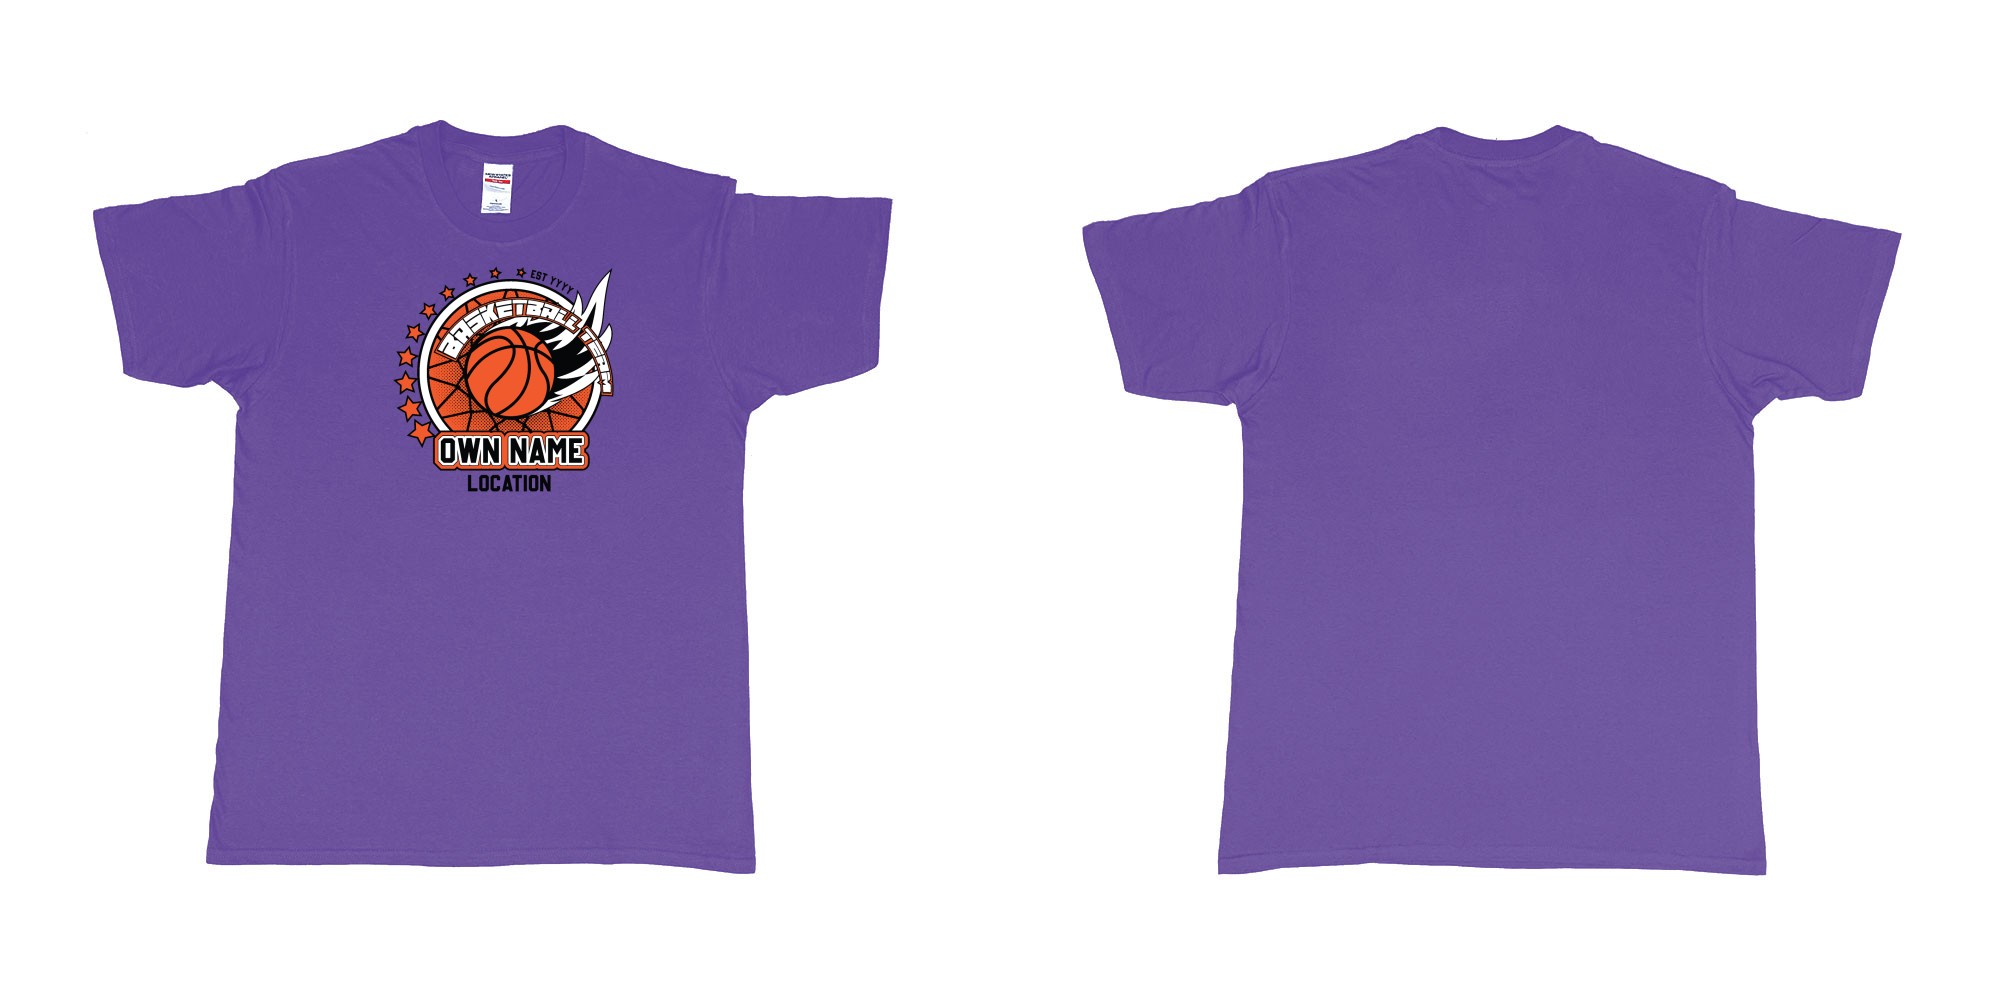 Custom tshirt design basketball team own name location established year custom design production bali in fabric color purple choice your own text made in Bali by The Pirate Way